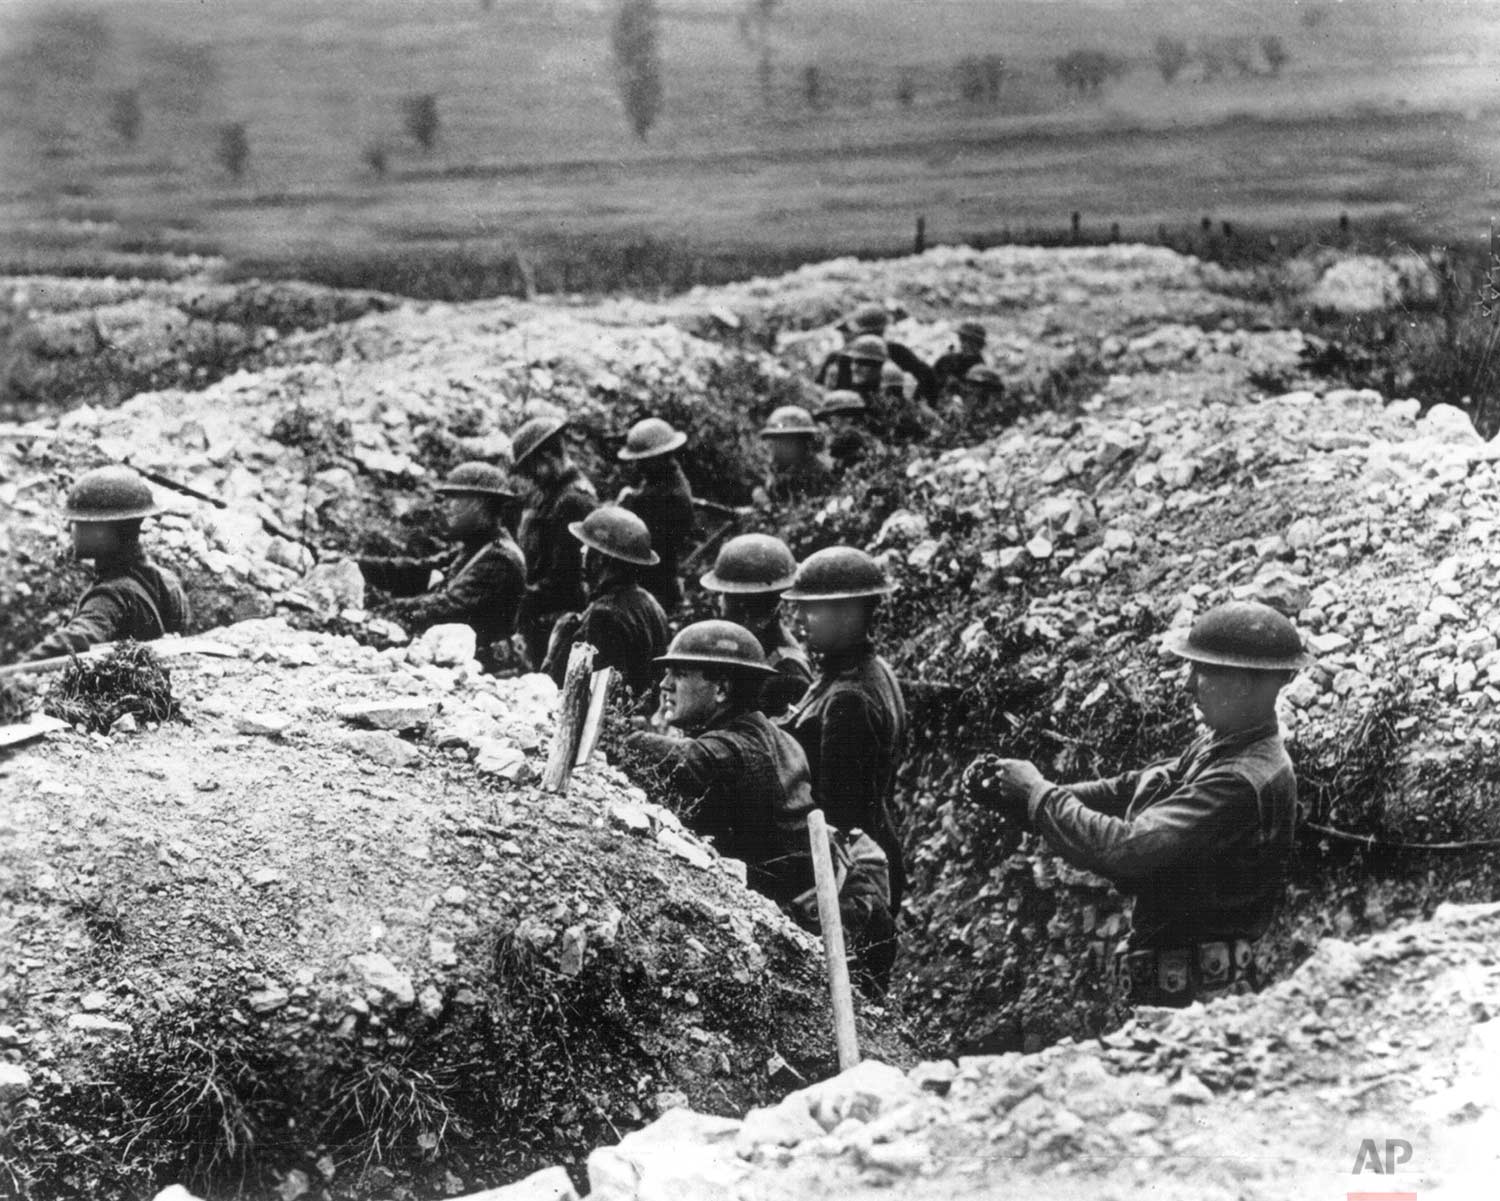  In this undated photo, United States Army troops stand in the trenches in France during World War One. (AP Photo) 